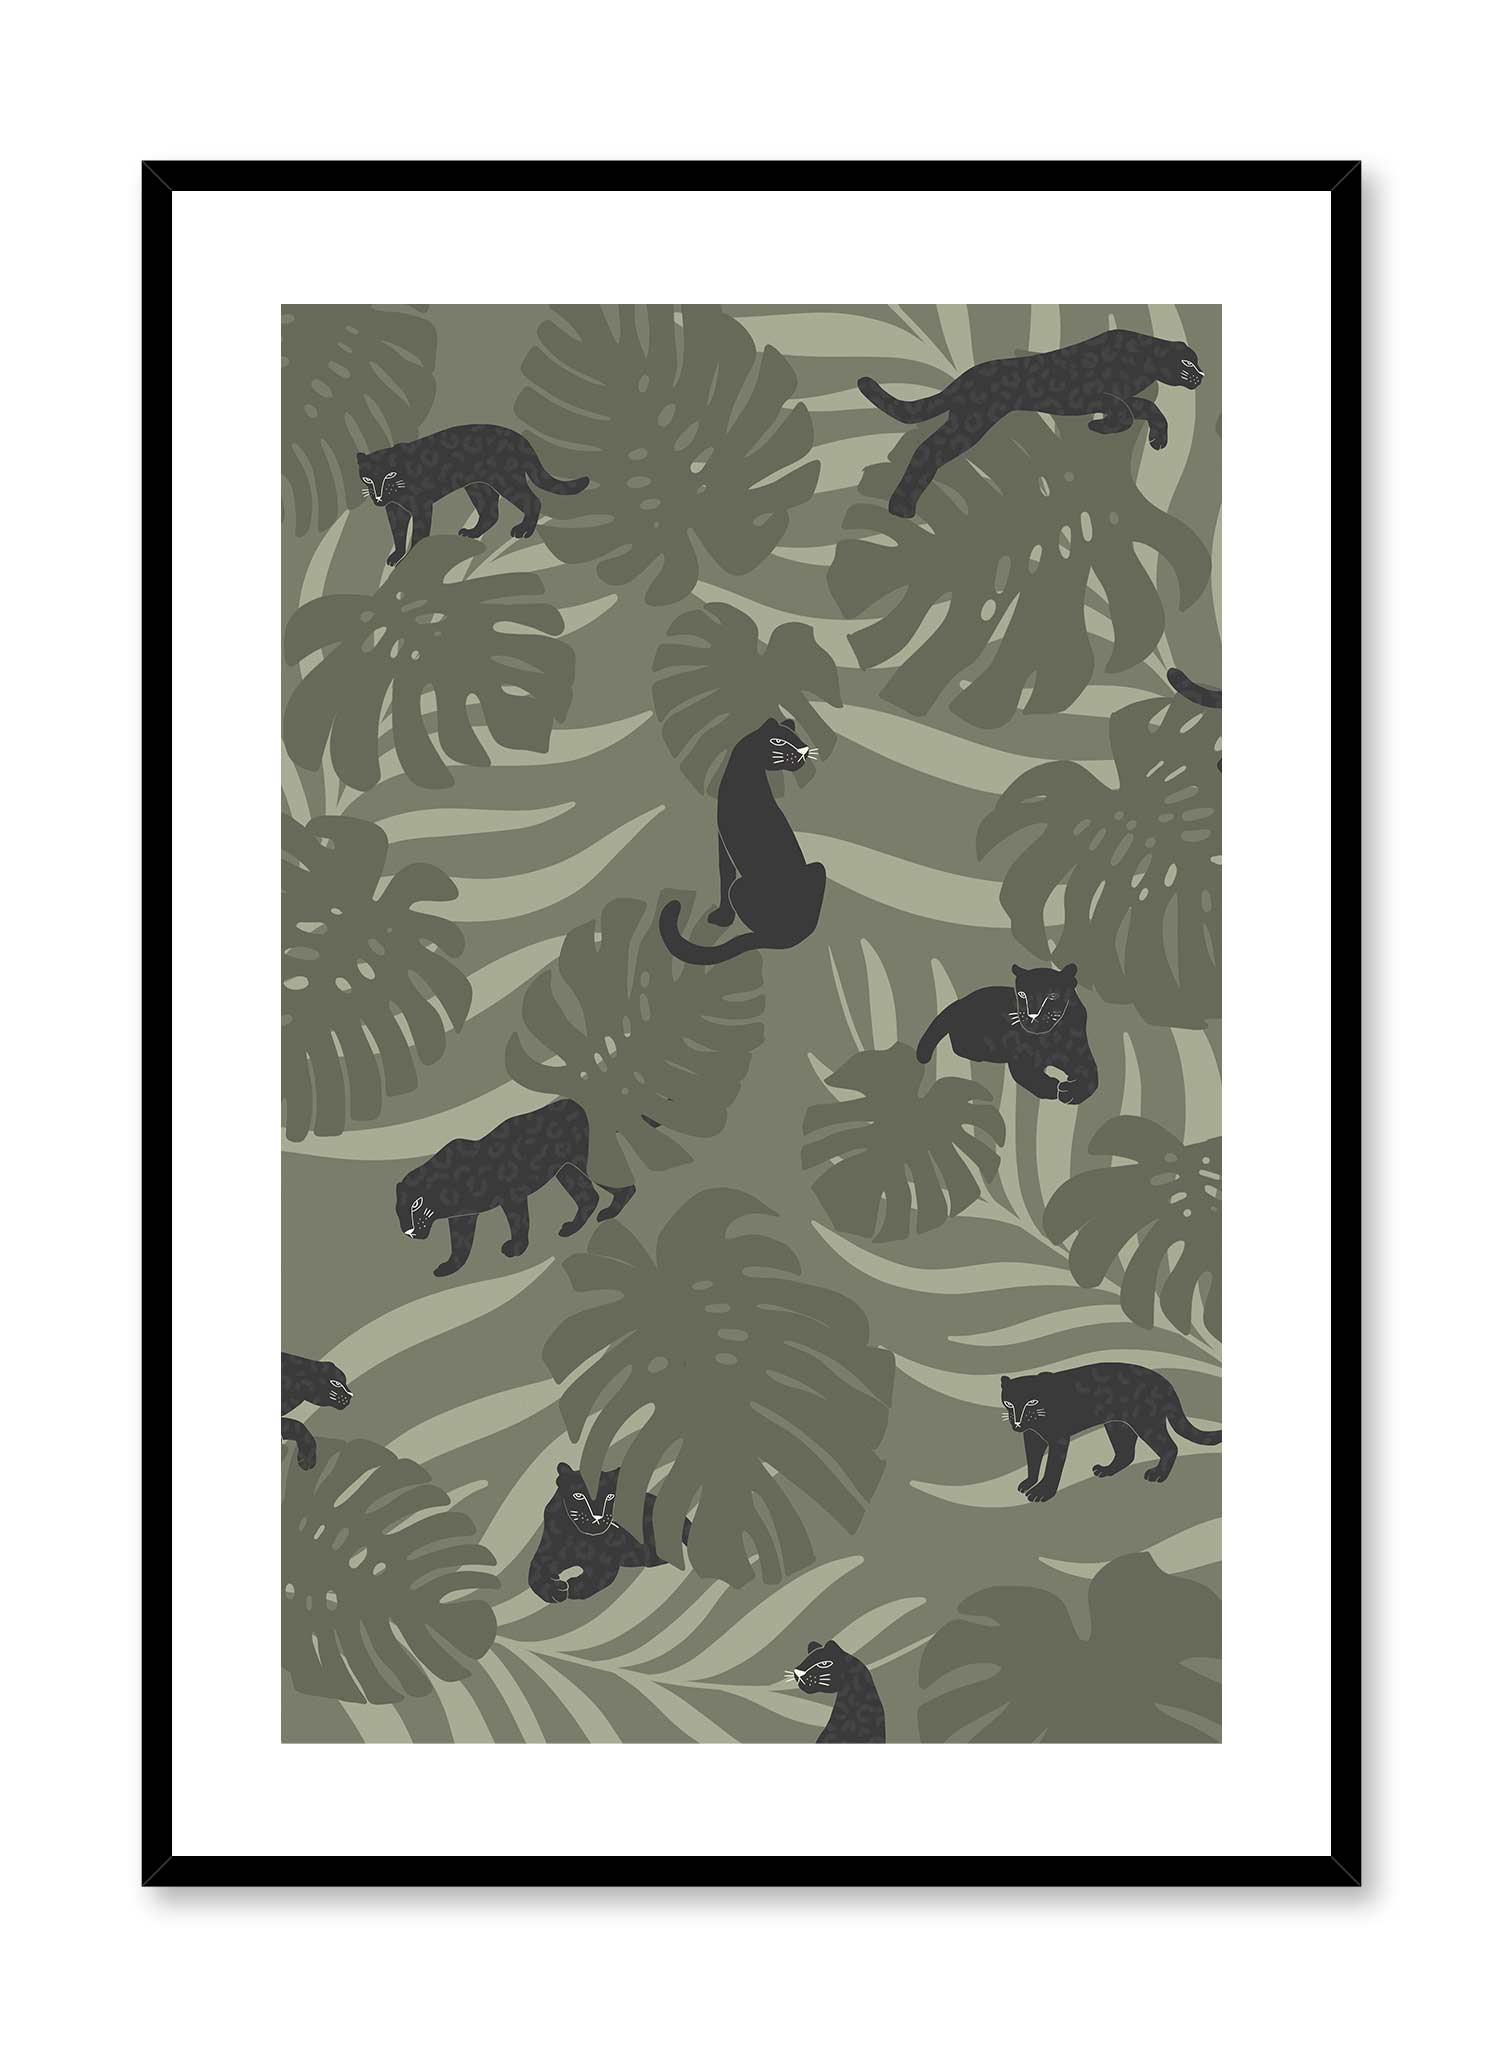 Panther Clan is a minimalist illustration of many black panthers resting or running on a green monstera and leaves background by Opposite Wall.